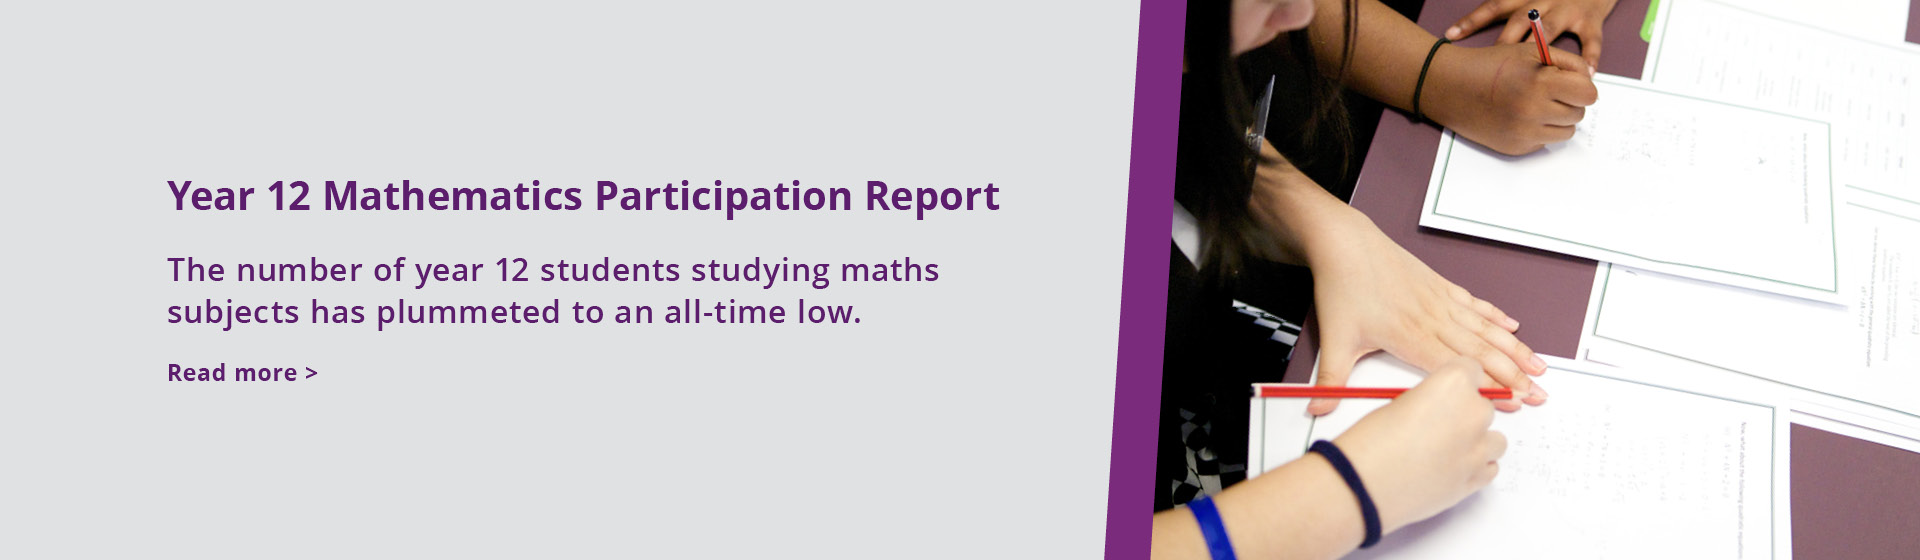 Year 12 Mathematics Participation Report Card: Enrolments Reach All-Time Low